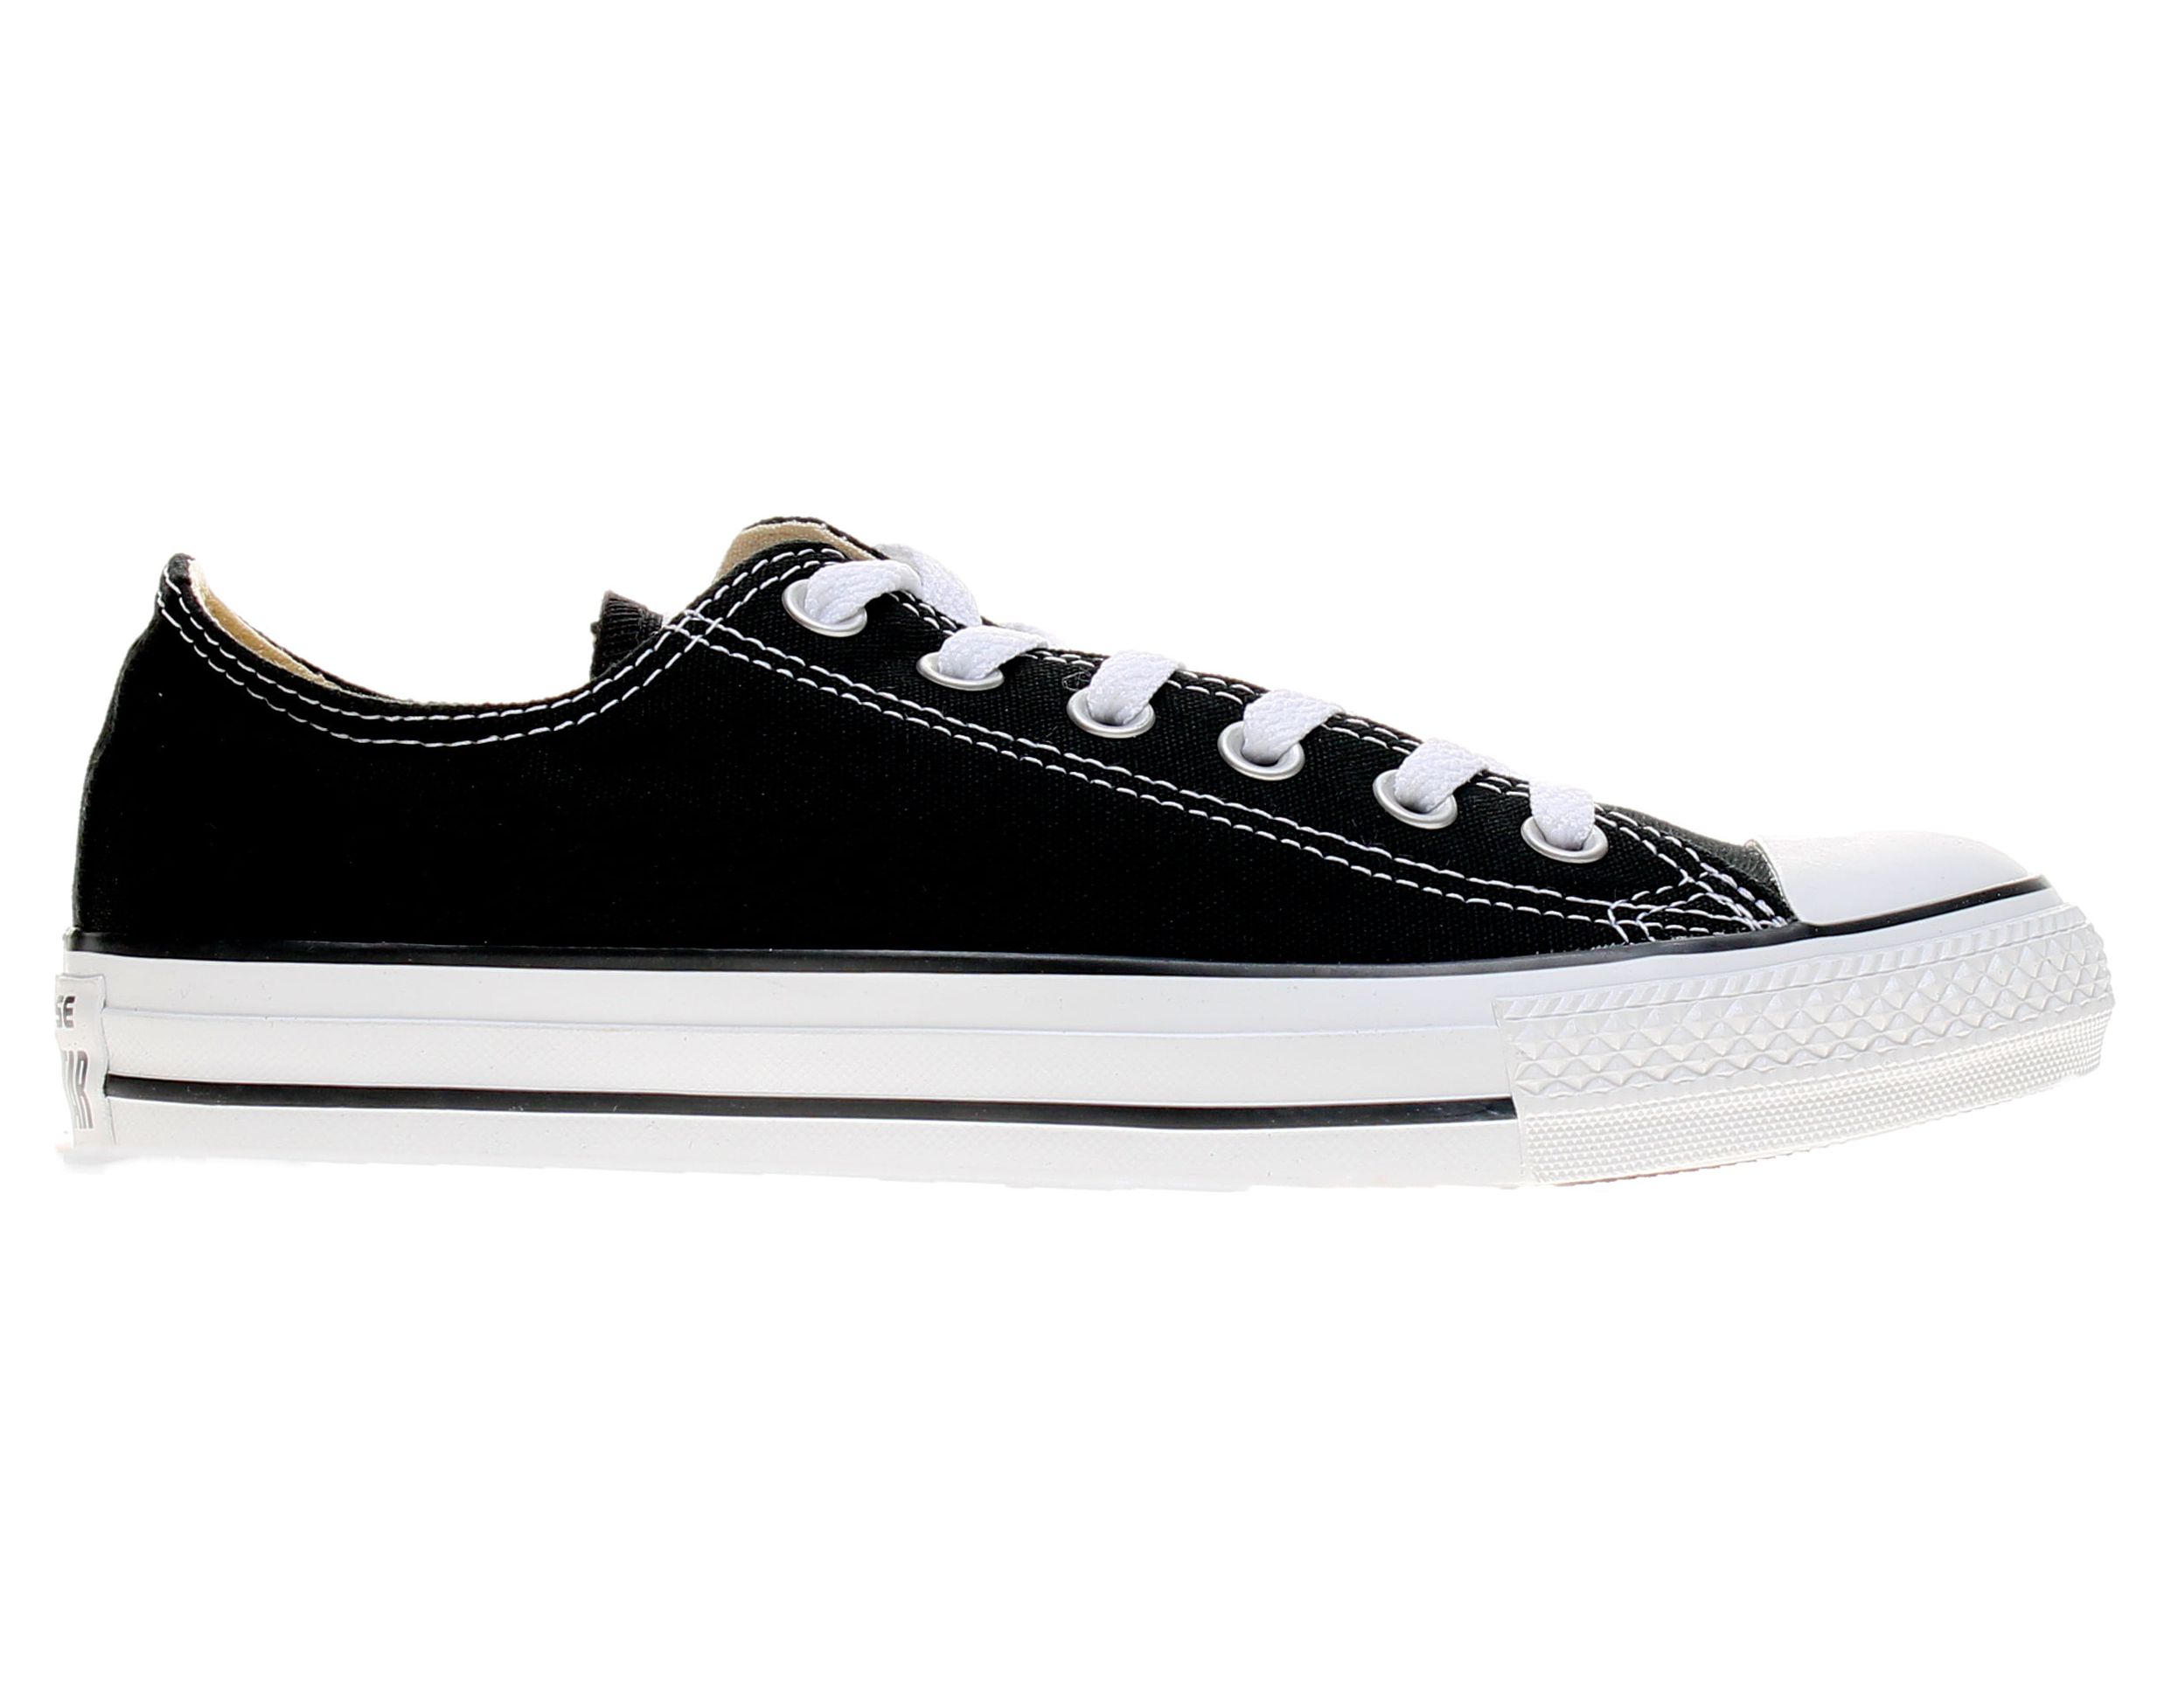 Converse Chuck Taylor All Star Low Top (International Version) Sneaker - image 2 of 6